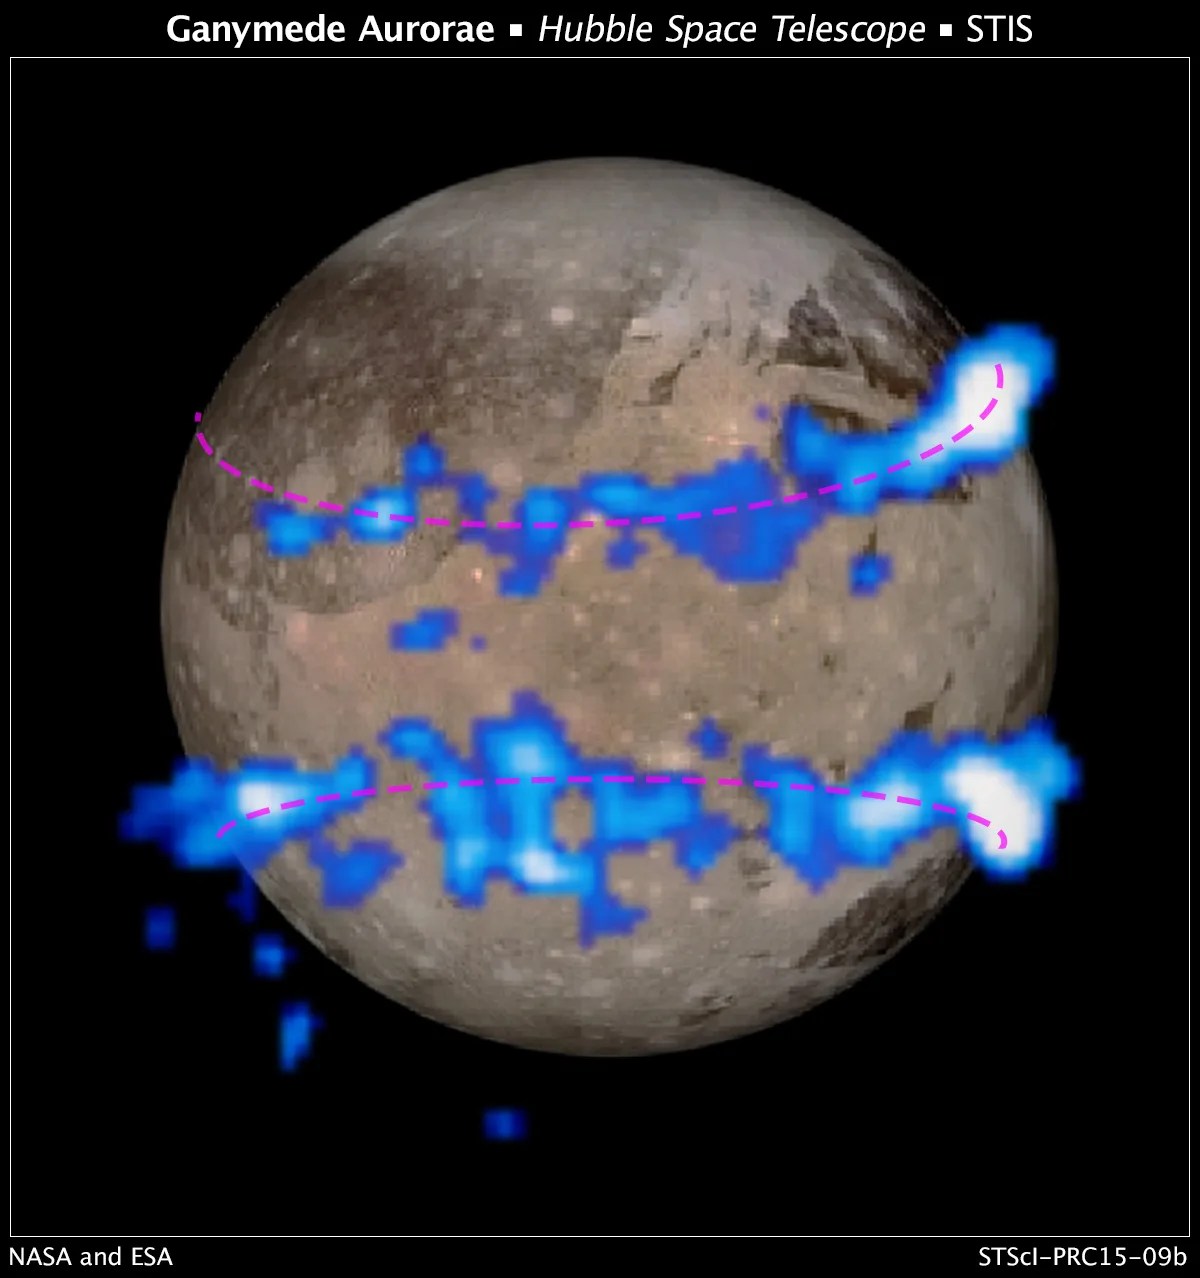 Hubble images of Ganymede's auroral belts (colored blue in this illustration).